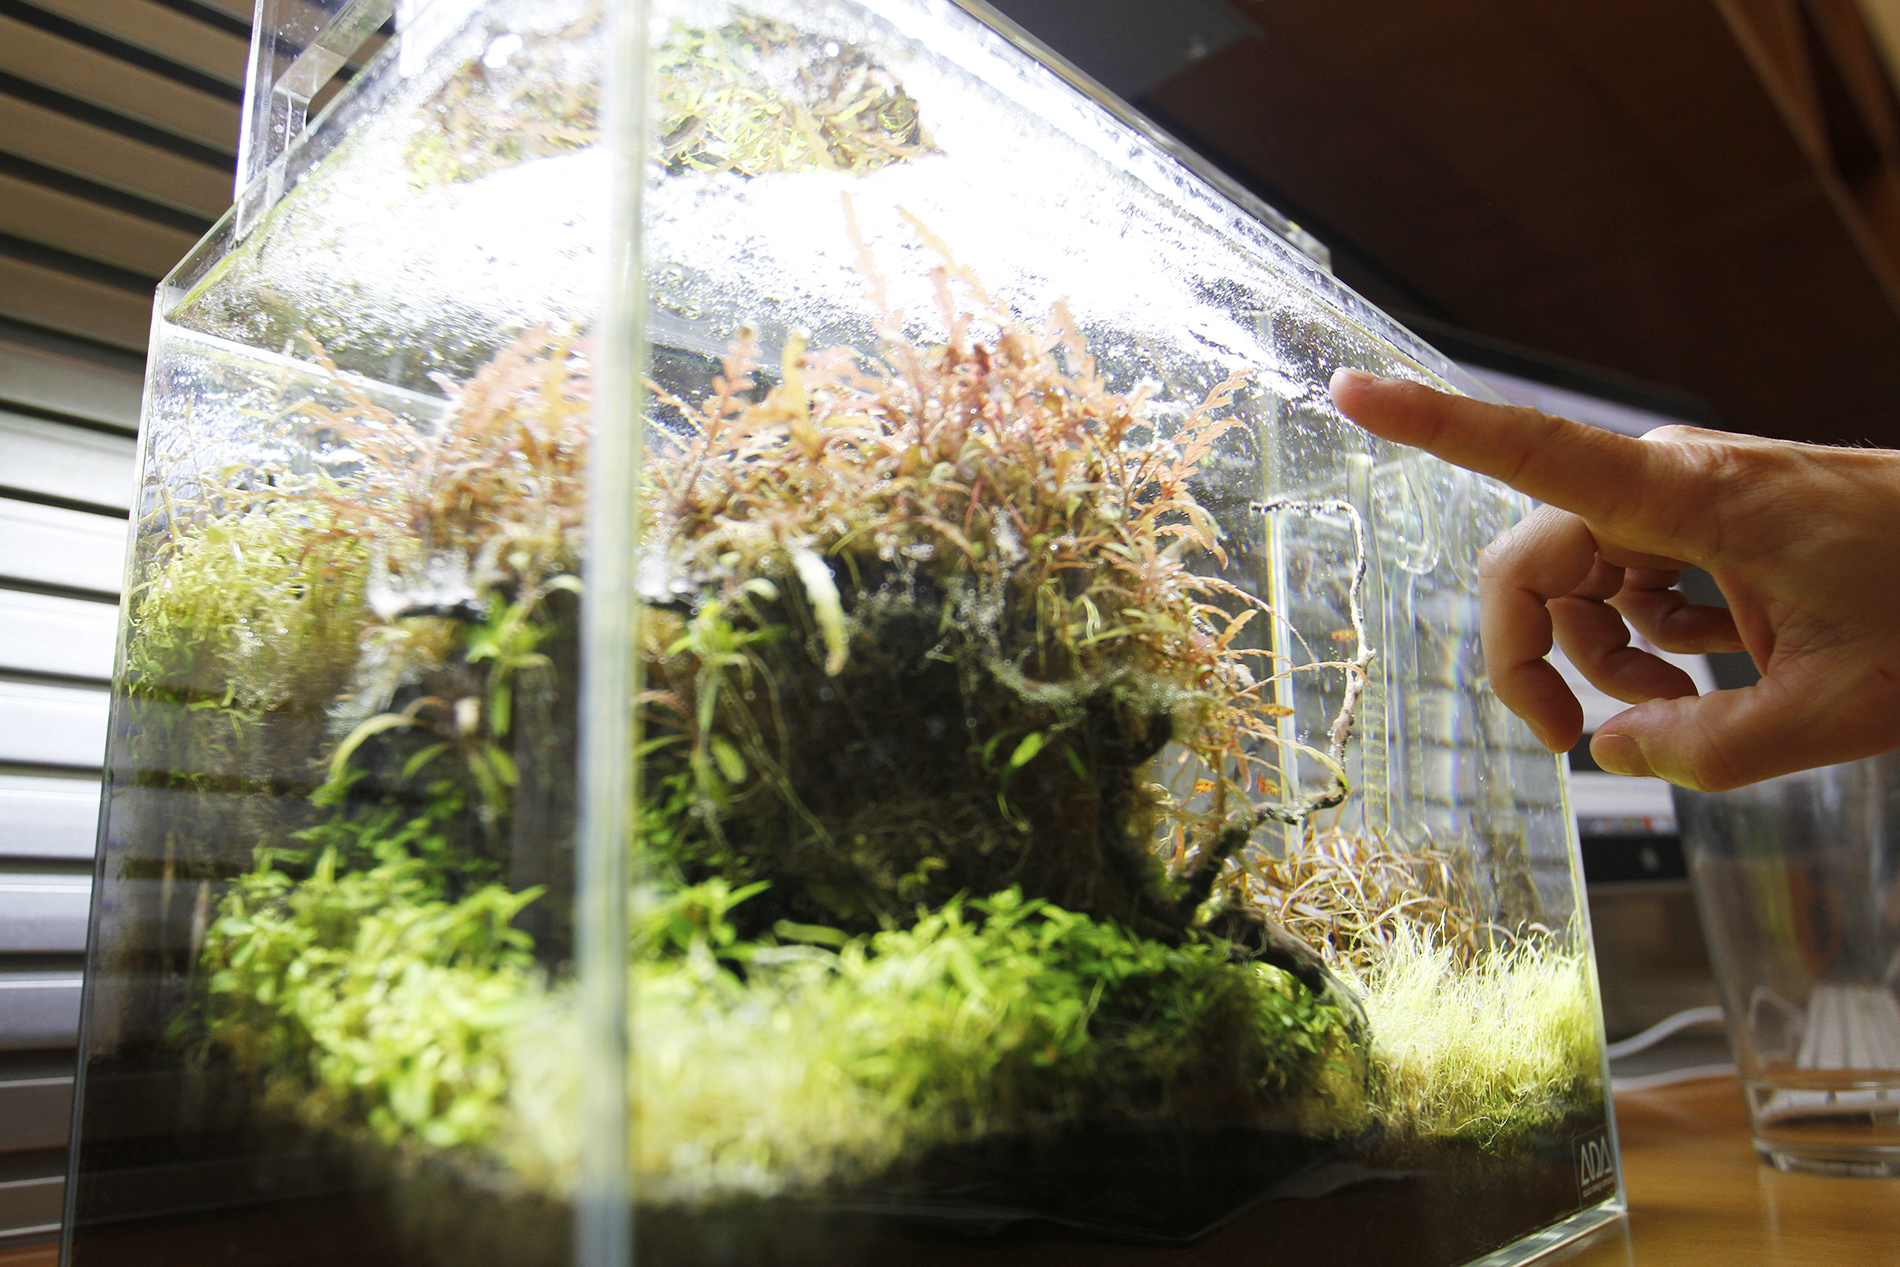 David Nicewicz points to the oxygen bubbles in his freshwater aquarium. (photo by Mary Lide Parker)